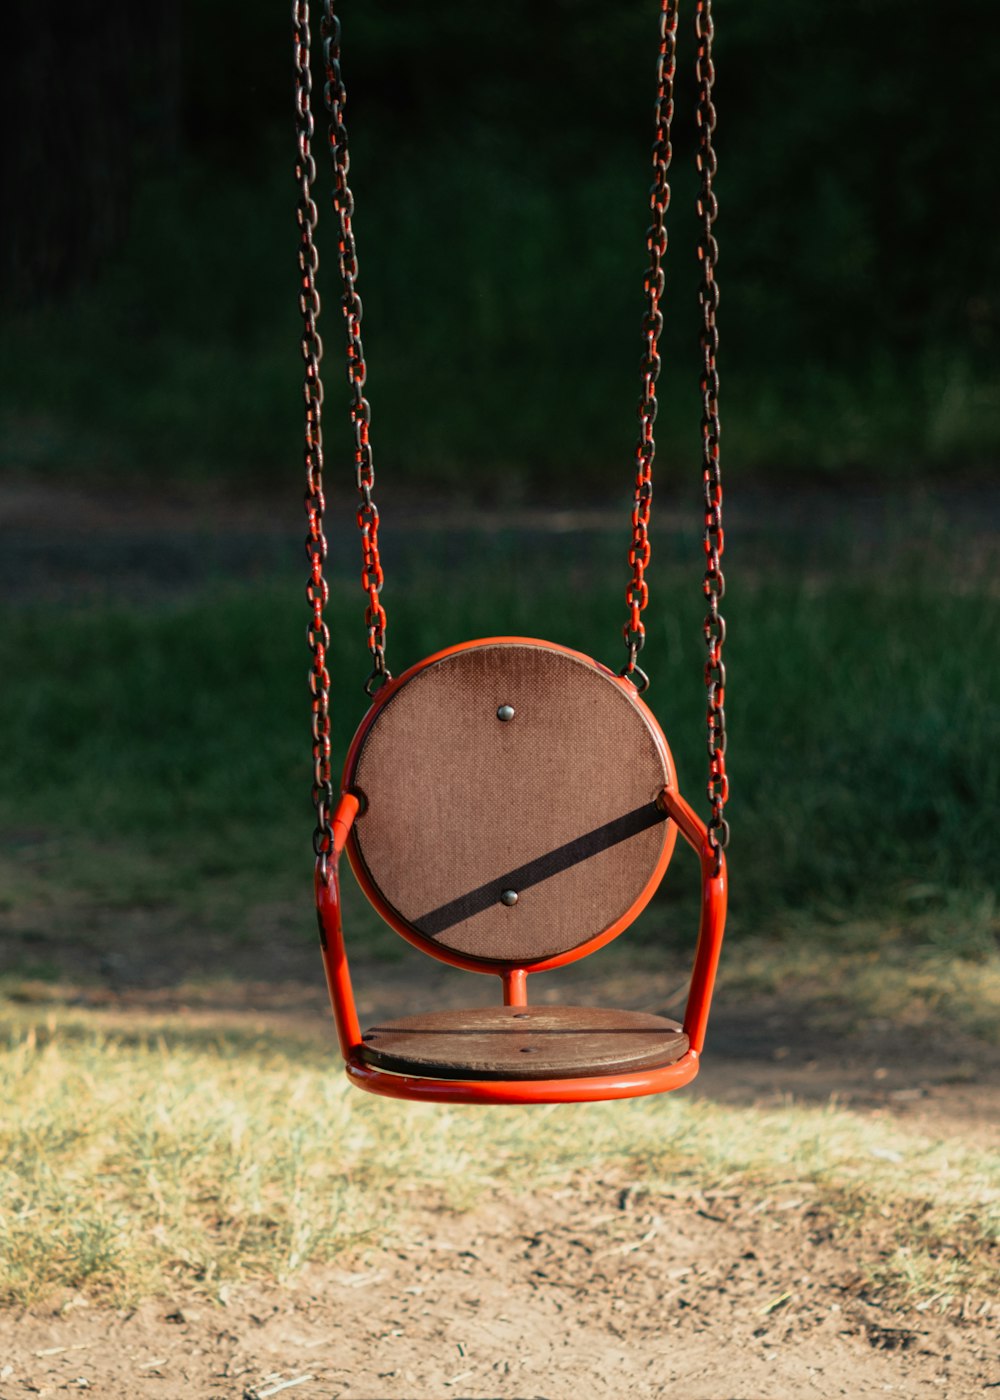 a wooden swing hanging from a chain in a park